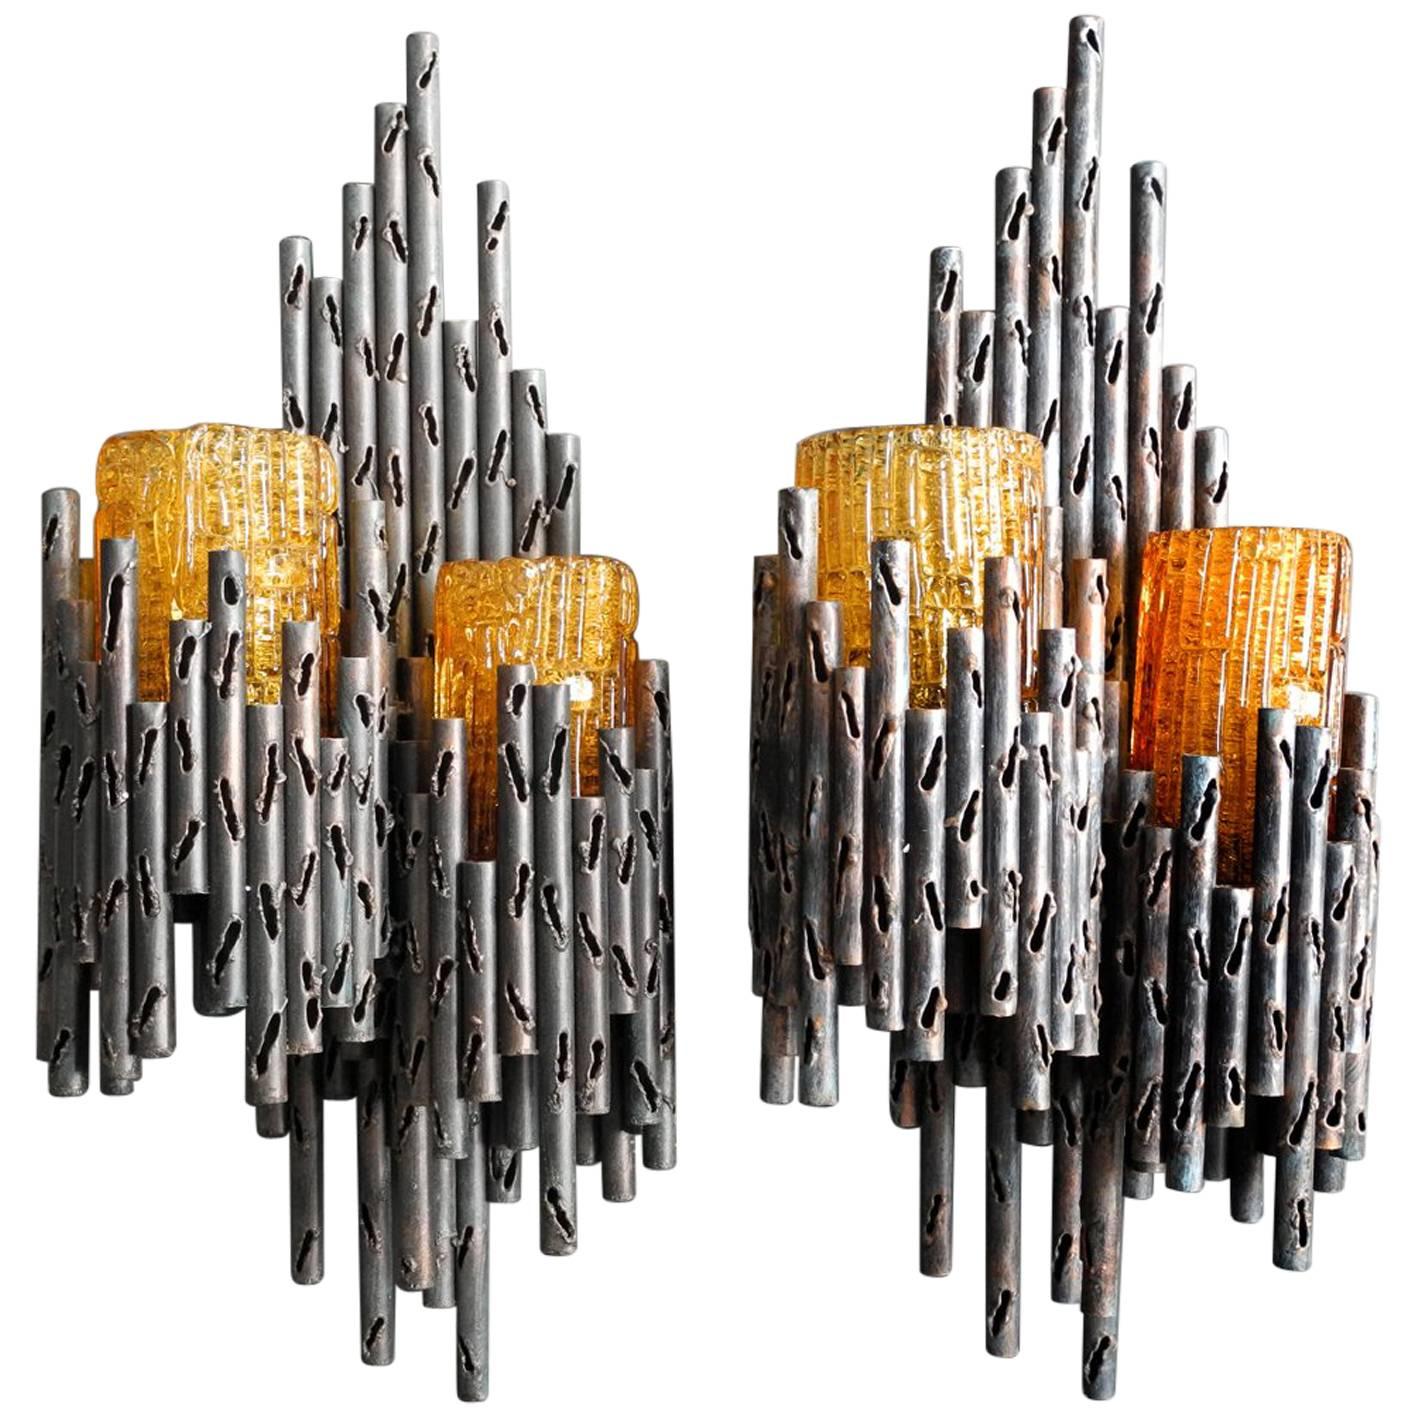 1960s Marcello Fantoni Brutalist Iron Wall Lamps with Orange Glass Shades, Pair